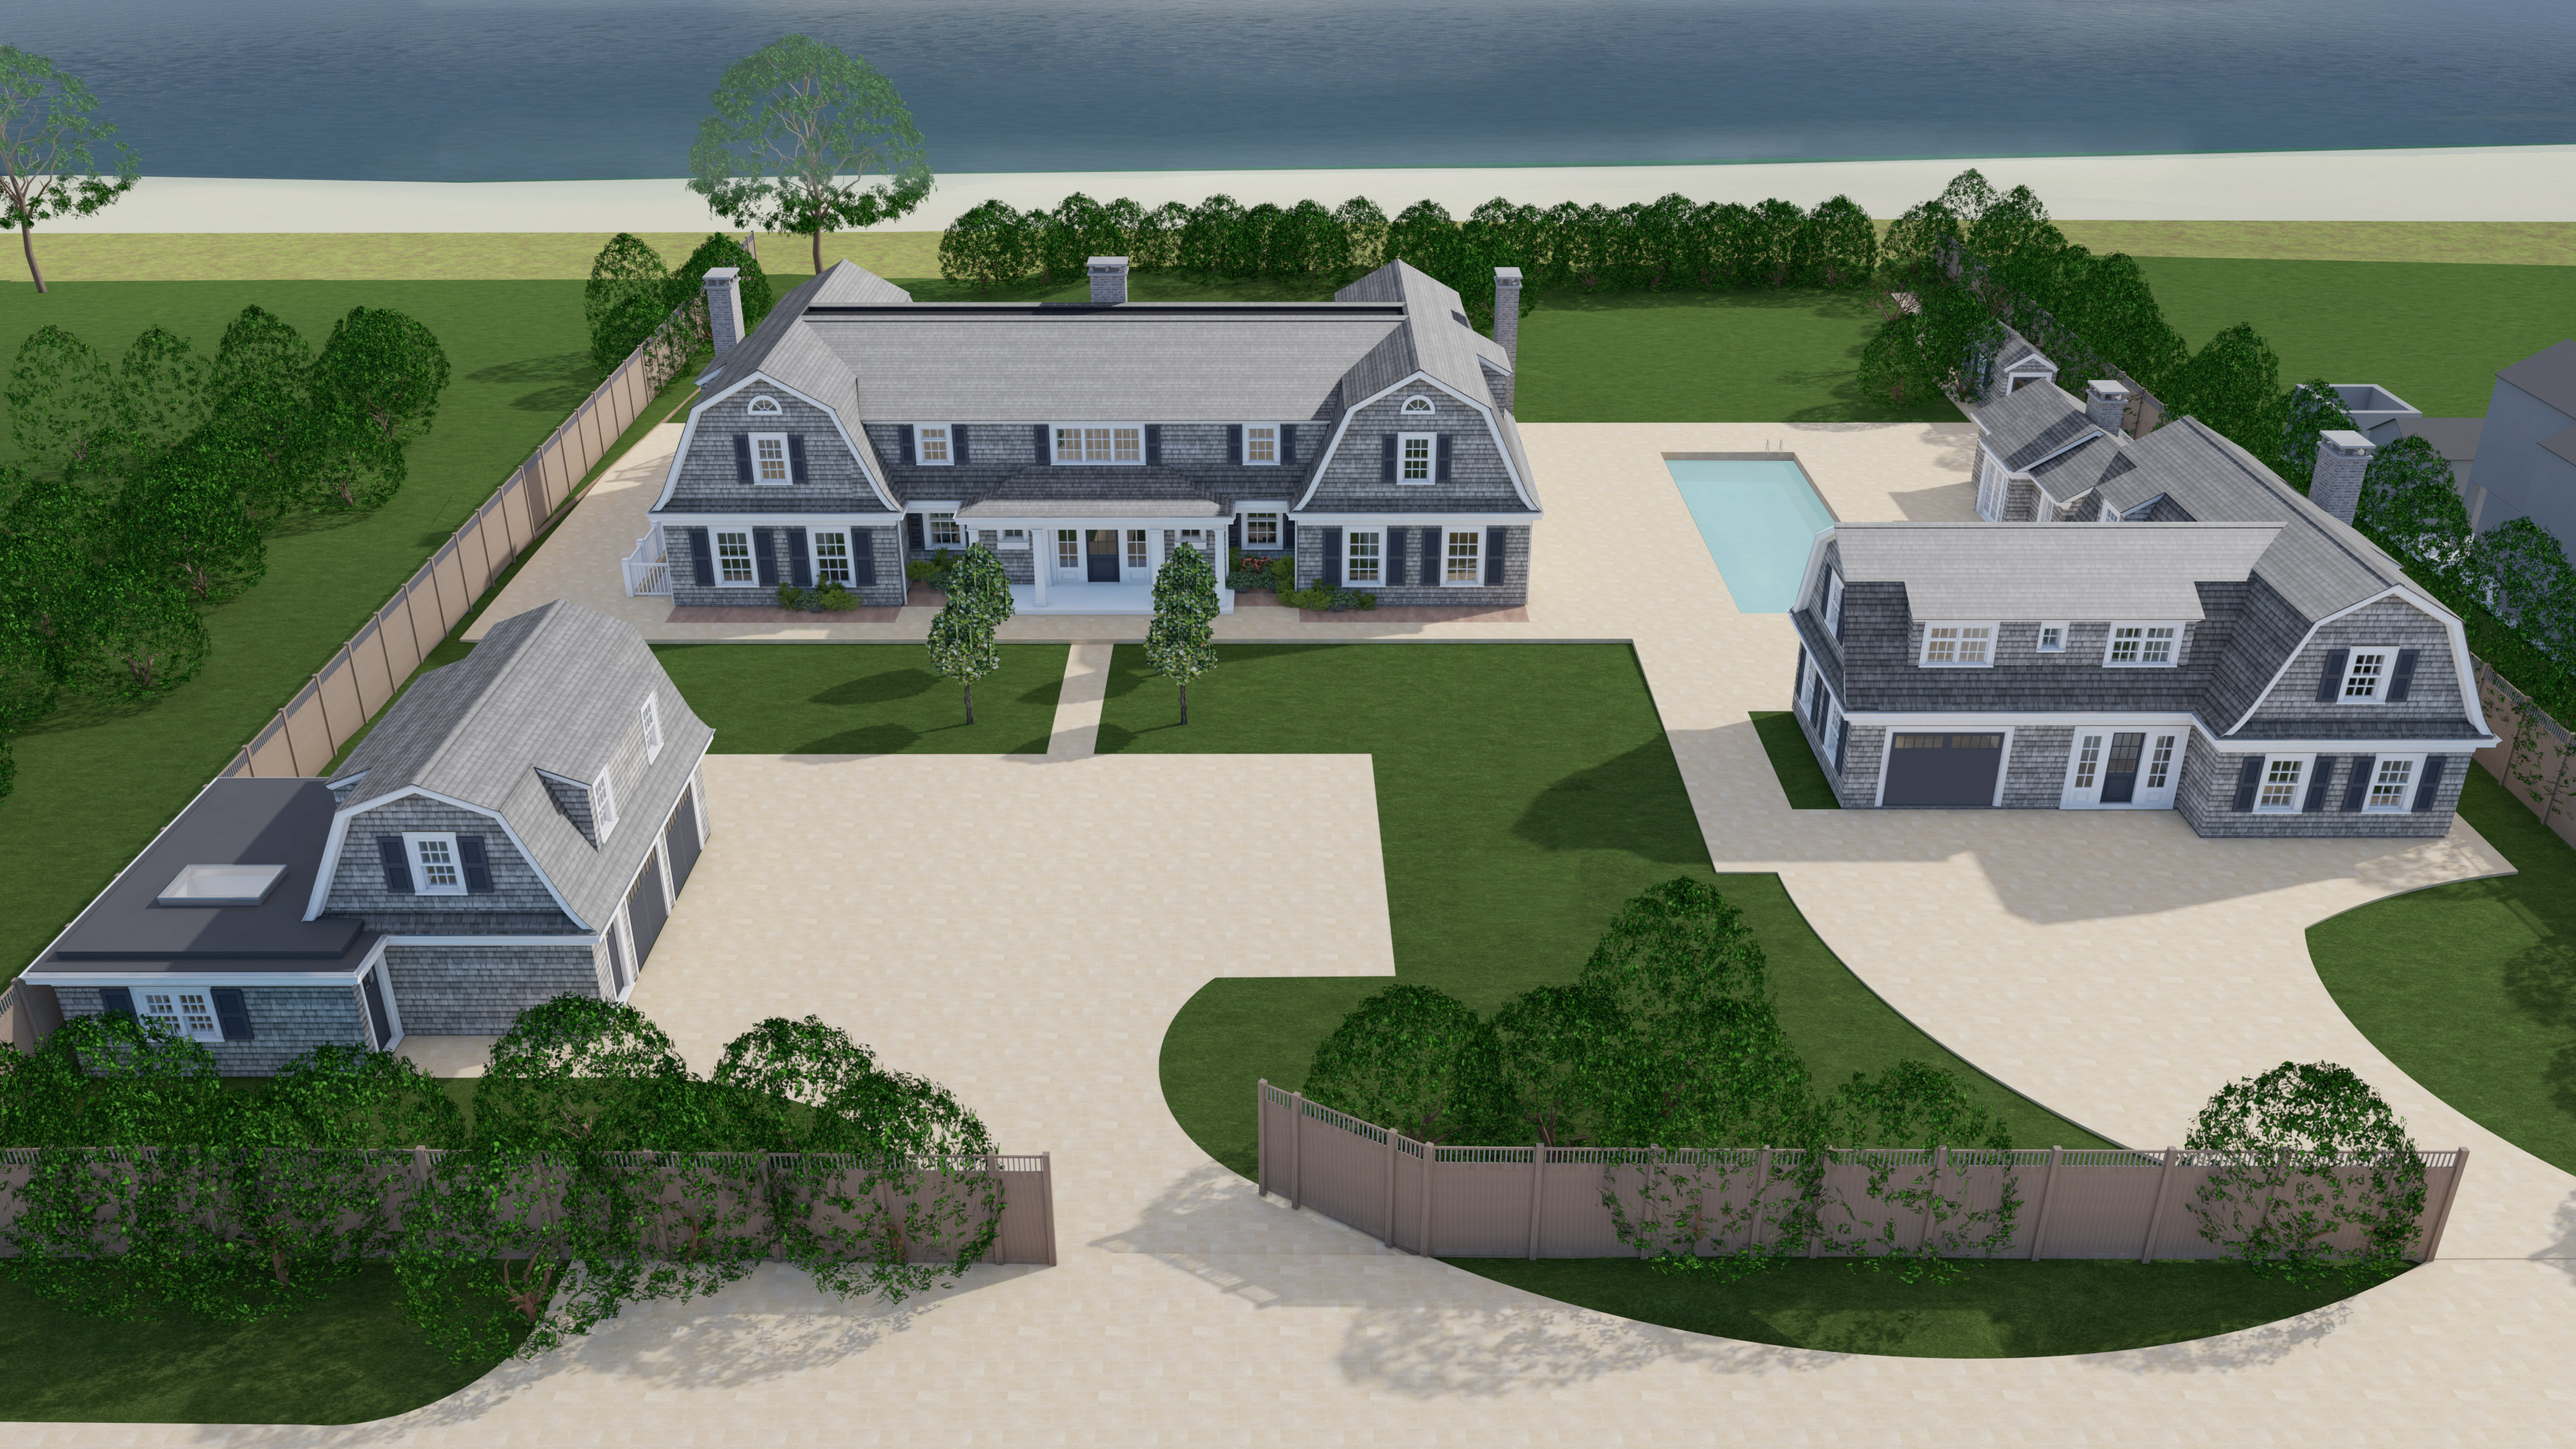 Planning Permission granted for new-build house and guest house on the beach in West Sussex